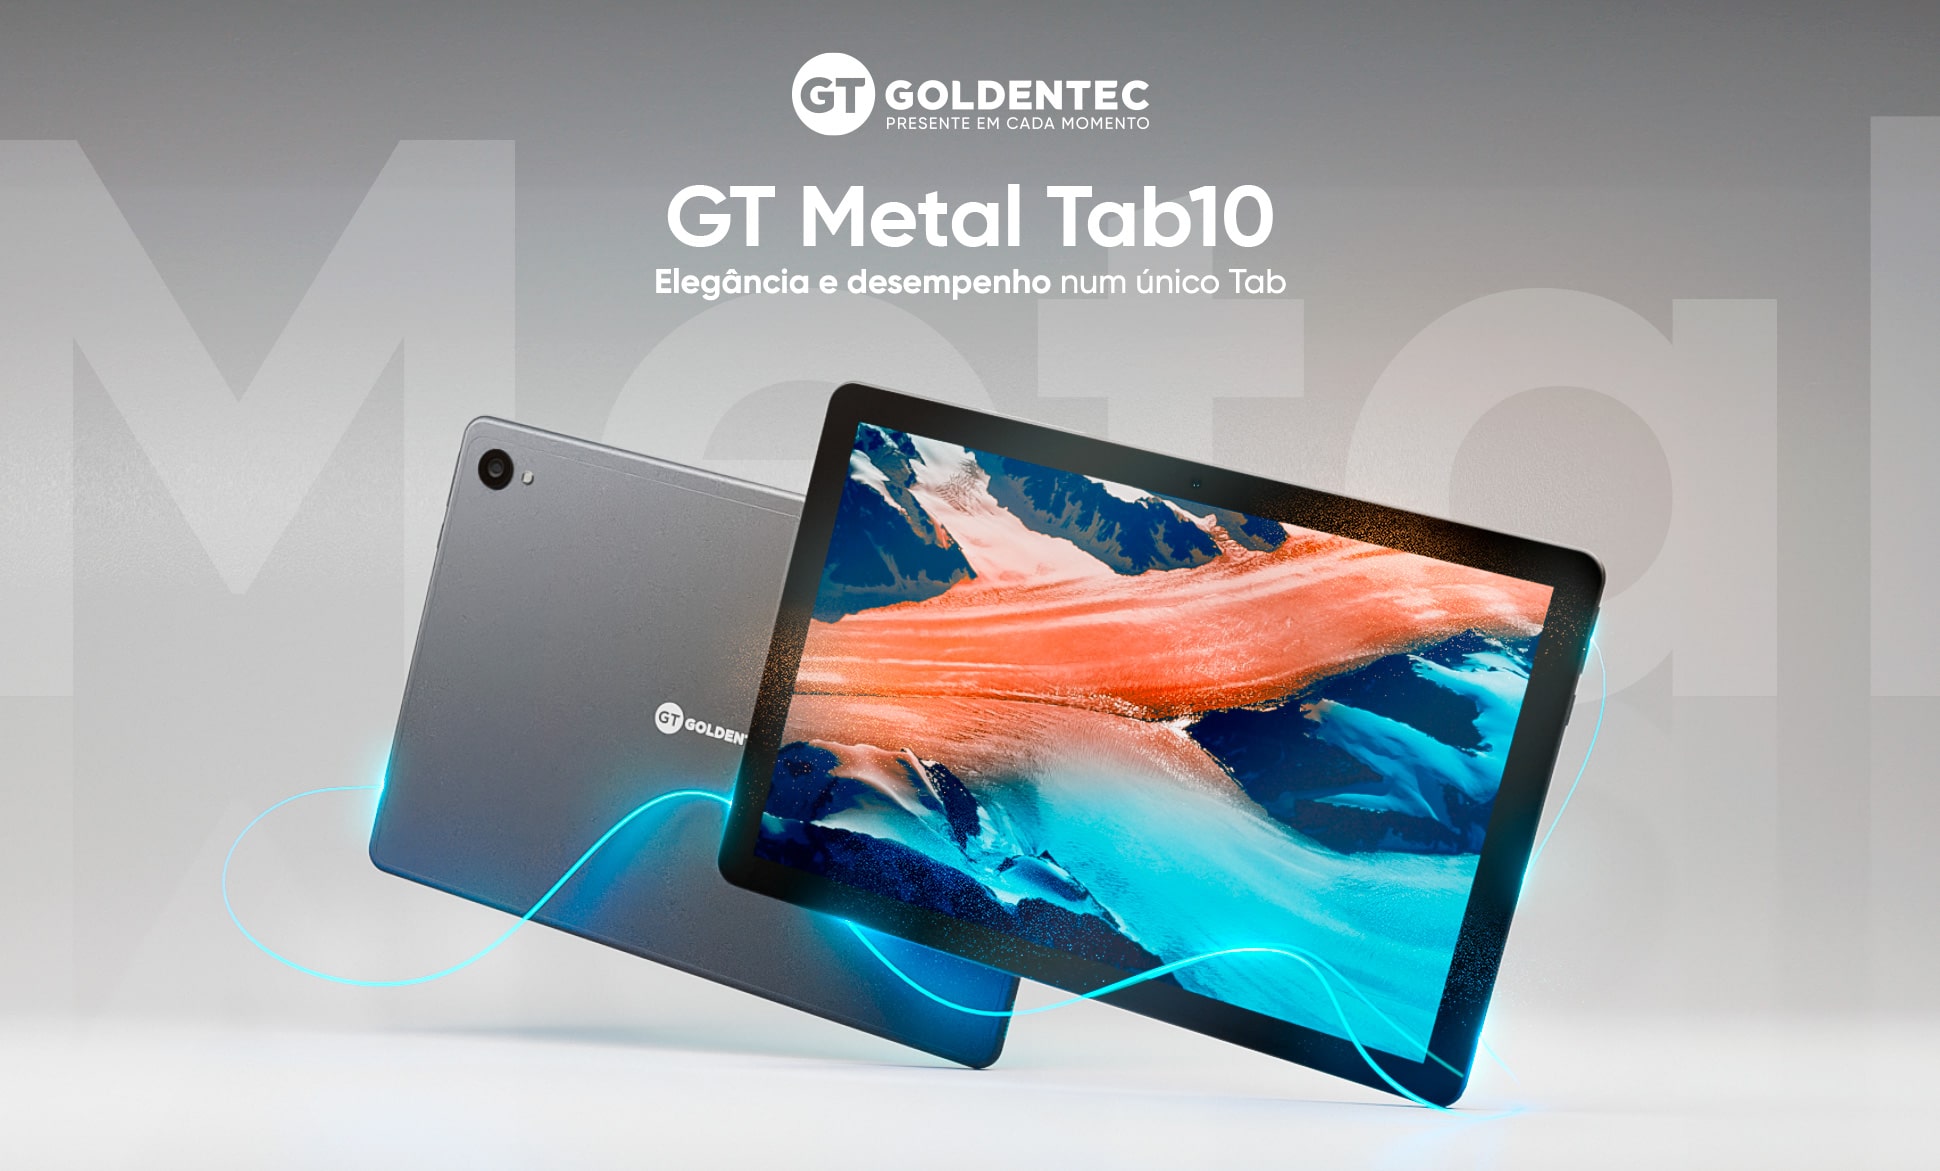 Tablet GT Tab10 Metal 4G 4GB + 64 GB Octa Core 10 HD IPS Android | GT